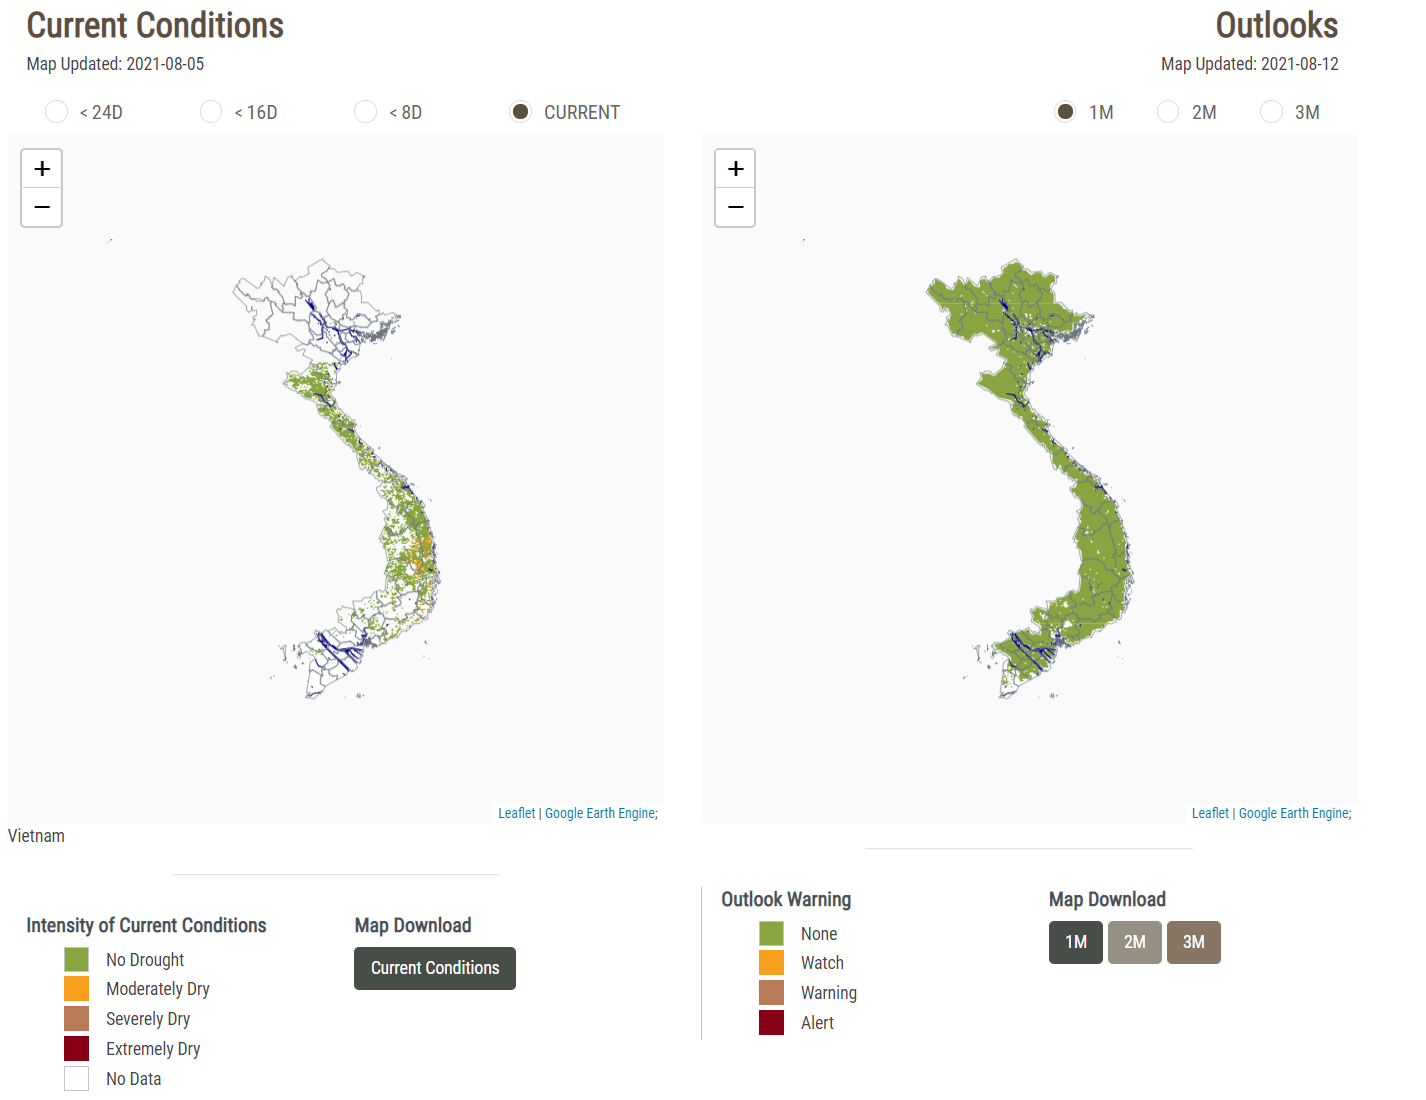 NASA SERVIR’s drought and crop watch tool allows users to choose a region and see current drought conditions and future outlooks. The image shows conditions in Vietnam on Aug. 5, 2021(left) and a one month forecast starting on Aug. 12, 2021 (right).